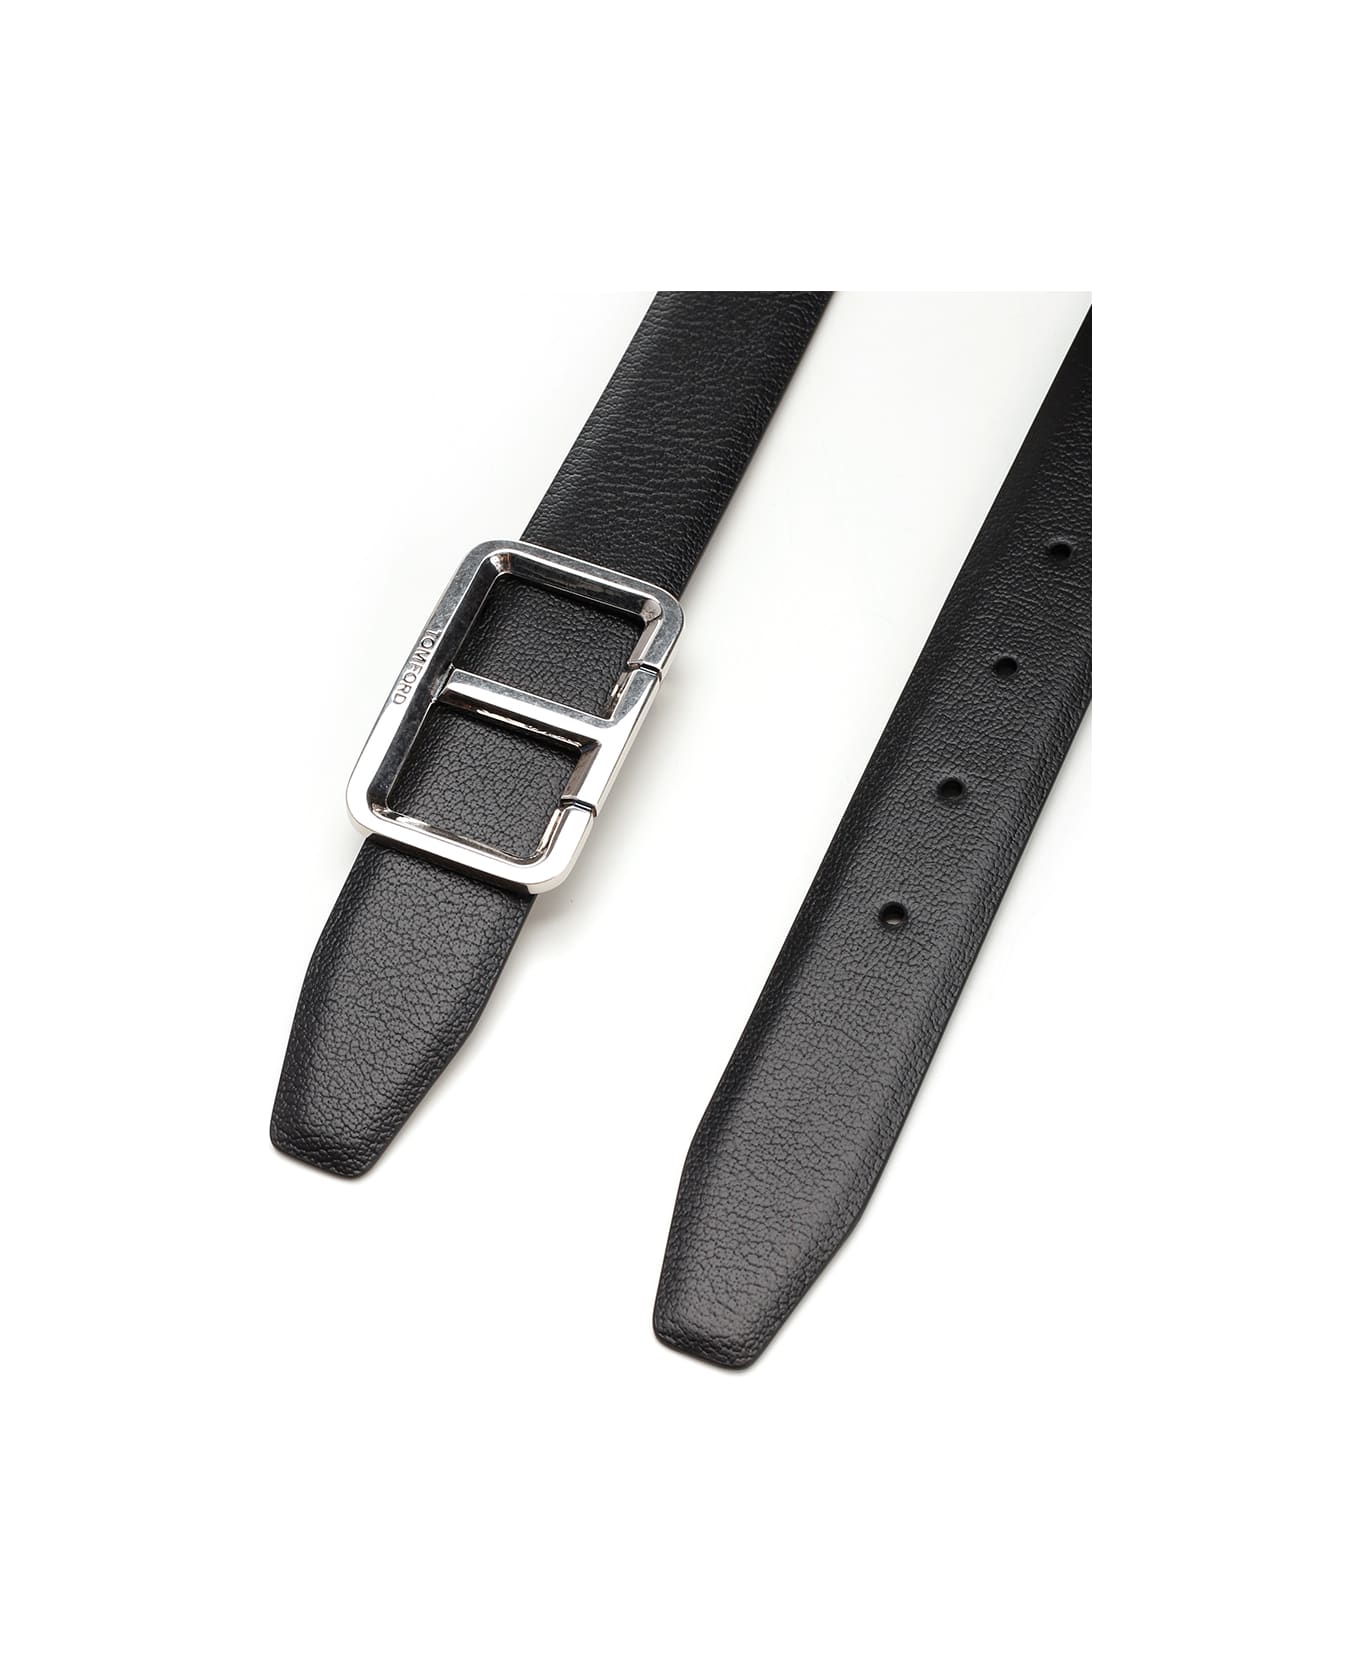 Tom Ford "t" Shiny Leather Belt With Silver Buckle - Black